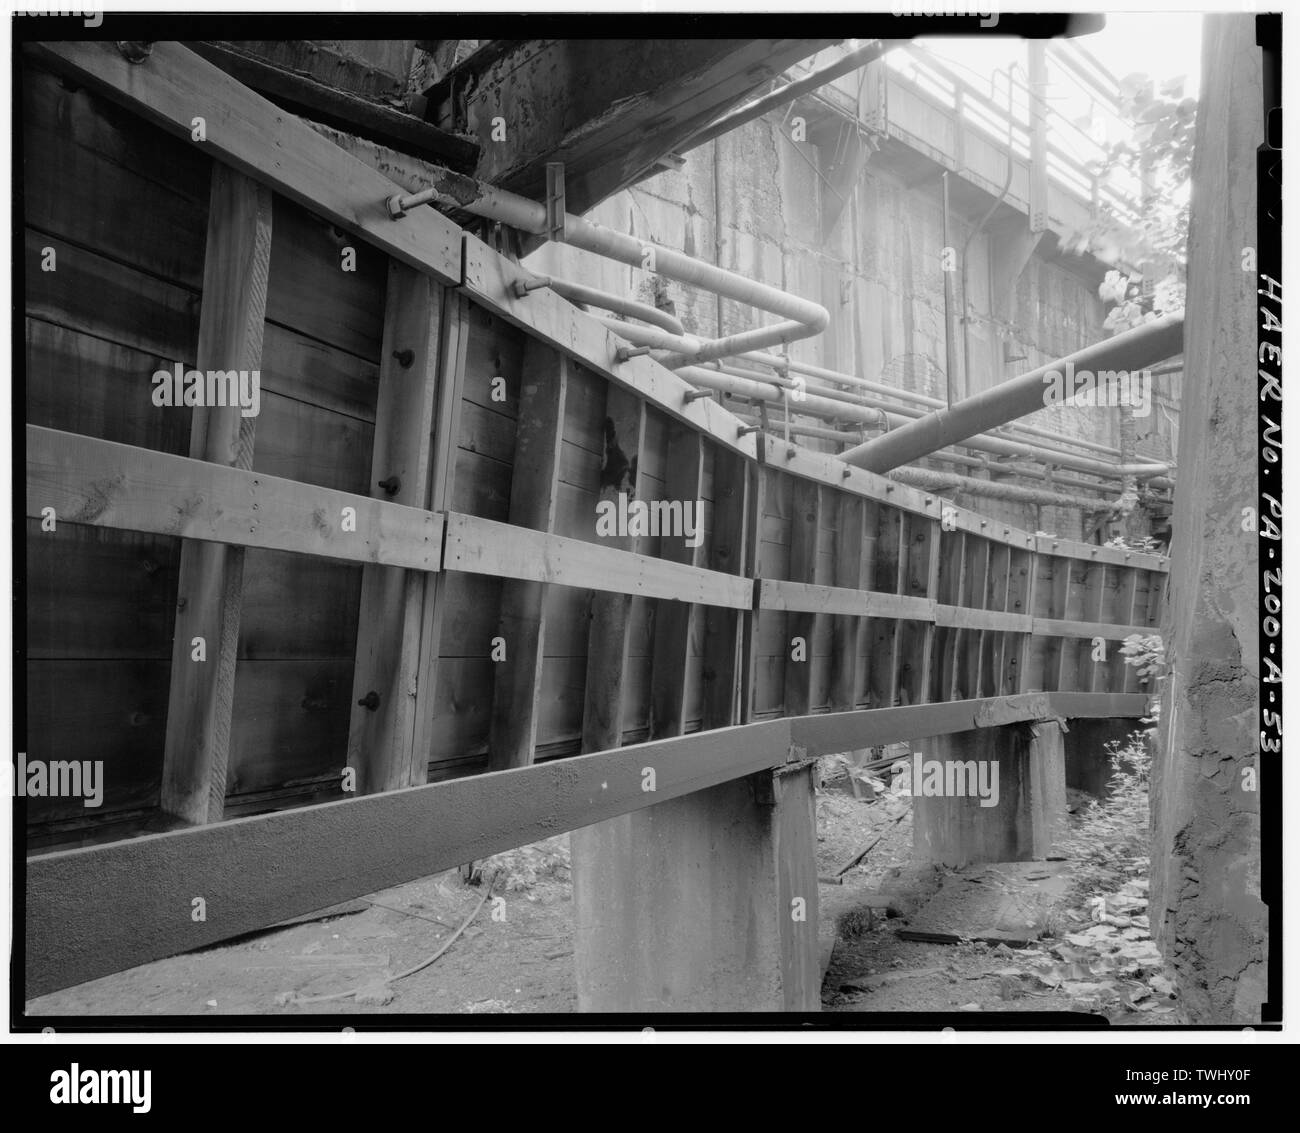 SIDE VIEW OF GRANULATED SLAG FLUME FOR CARRIE No. 6. - U.S. Steel Homestead Works, Blast Furnace Plant, Along Monongahela River, Homestead, Allegheny County, PA; U.S. Steel Corporation; Brown, James S; Clark, E L; Fownes, H C; Fownes, W C; Brown Hoisting Machinery Company; Massicks and Crooke; Pollock Company; Westinghouse Electric Company; Wilson-Snyder; Allis-Chalmers Company; Keystone Bridge Company; Riley-Stoker; Ingersoll-Rand; S. P. Kinney; Research-Cottrell, Incorporated; Worthington [pump manufacturer]; American Bridge Company; Dravo Engineering Corporation; General Electric Company; S Stock Photo